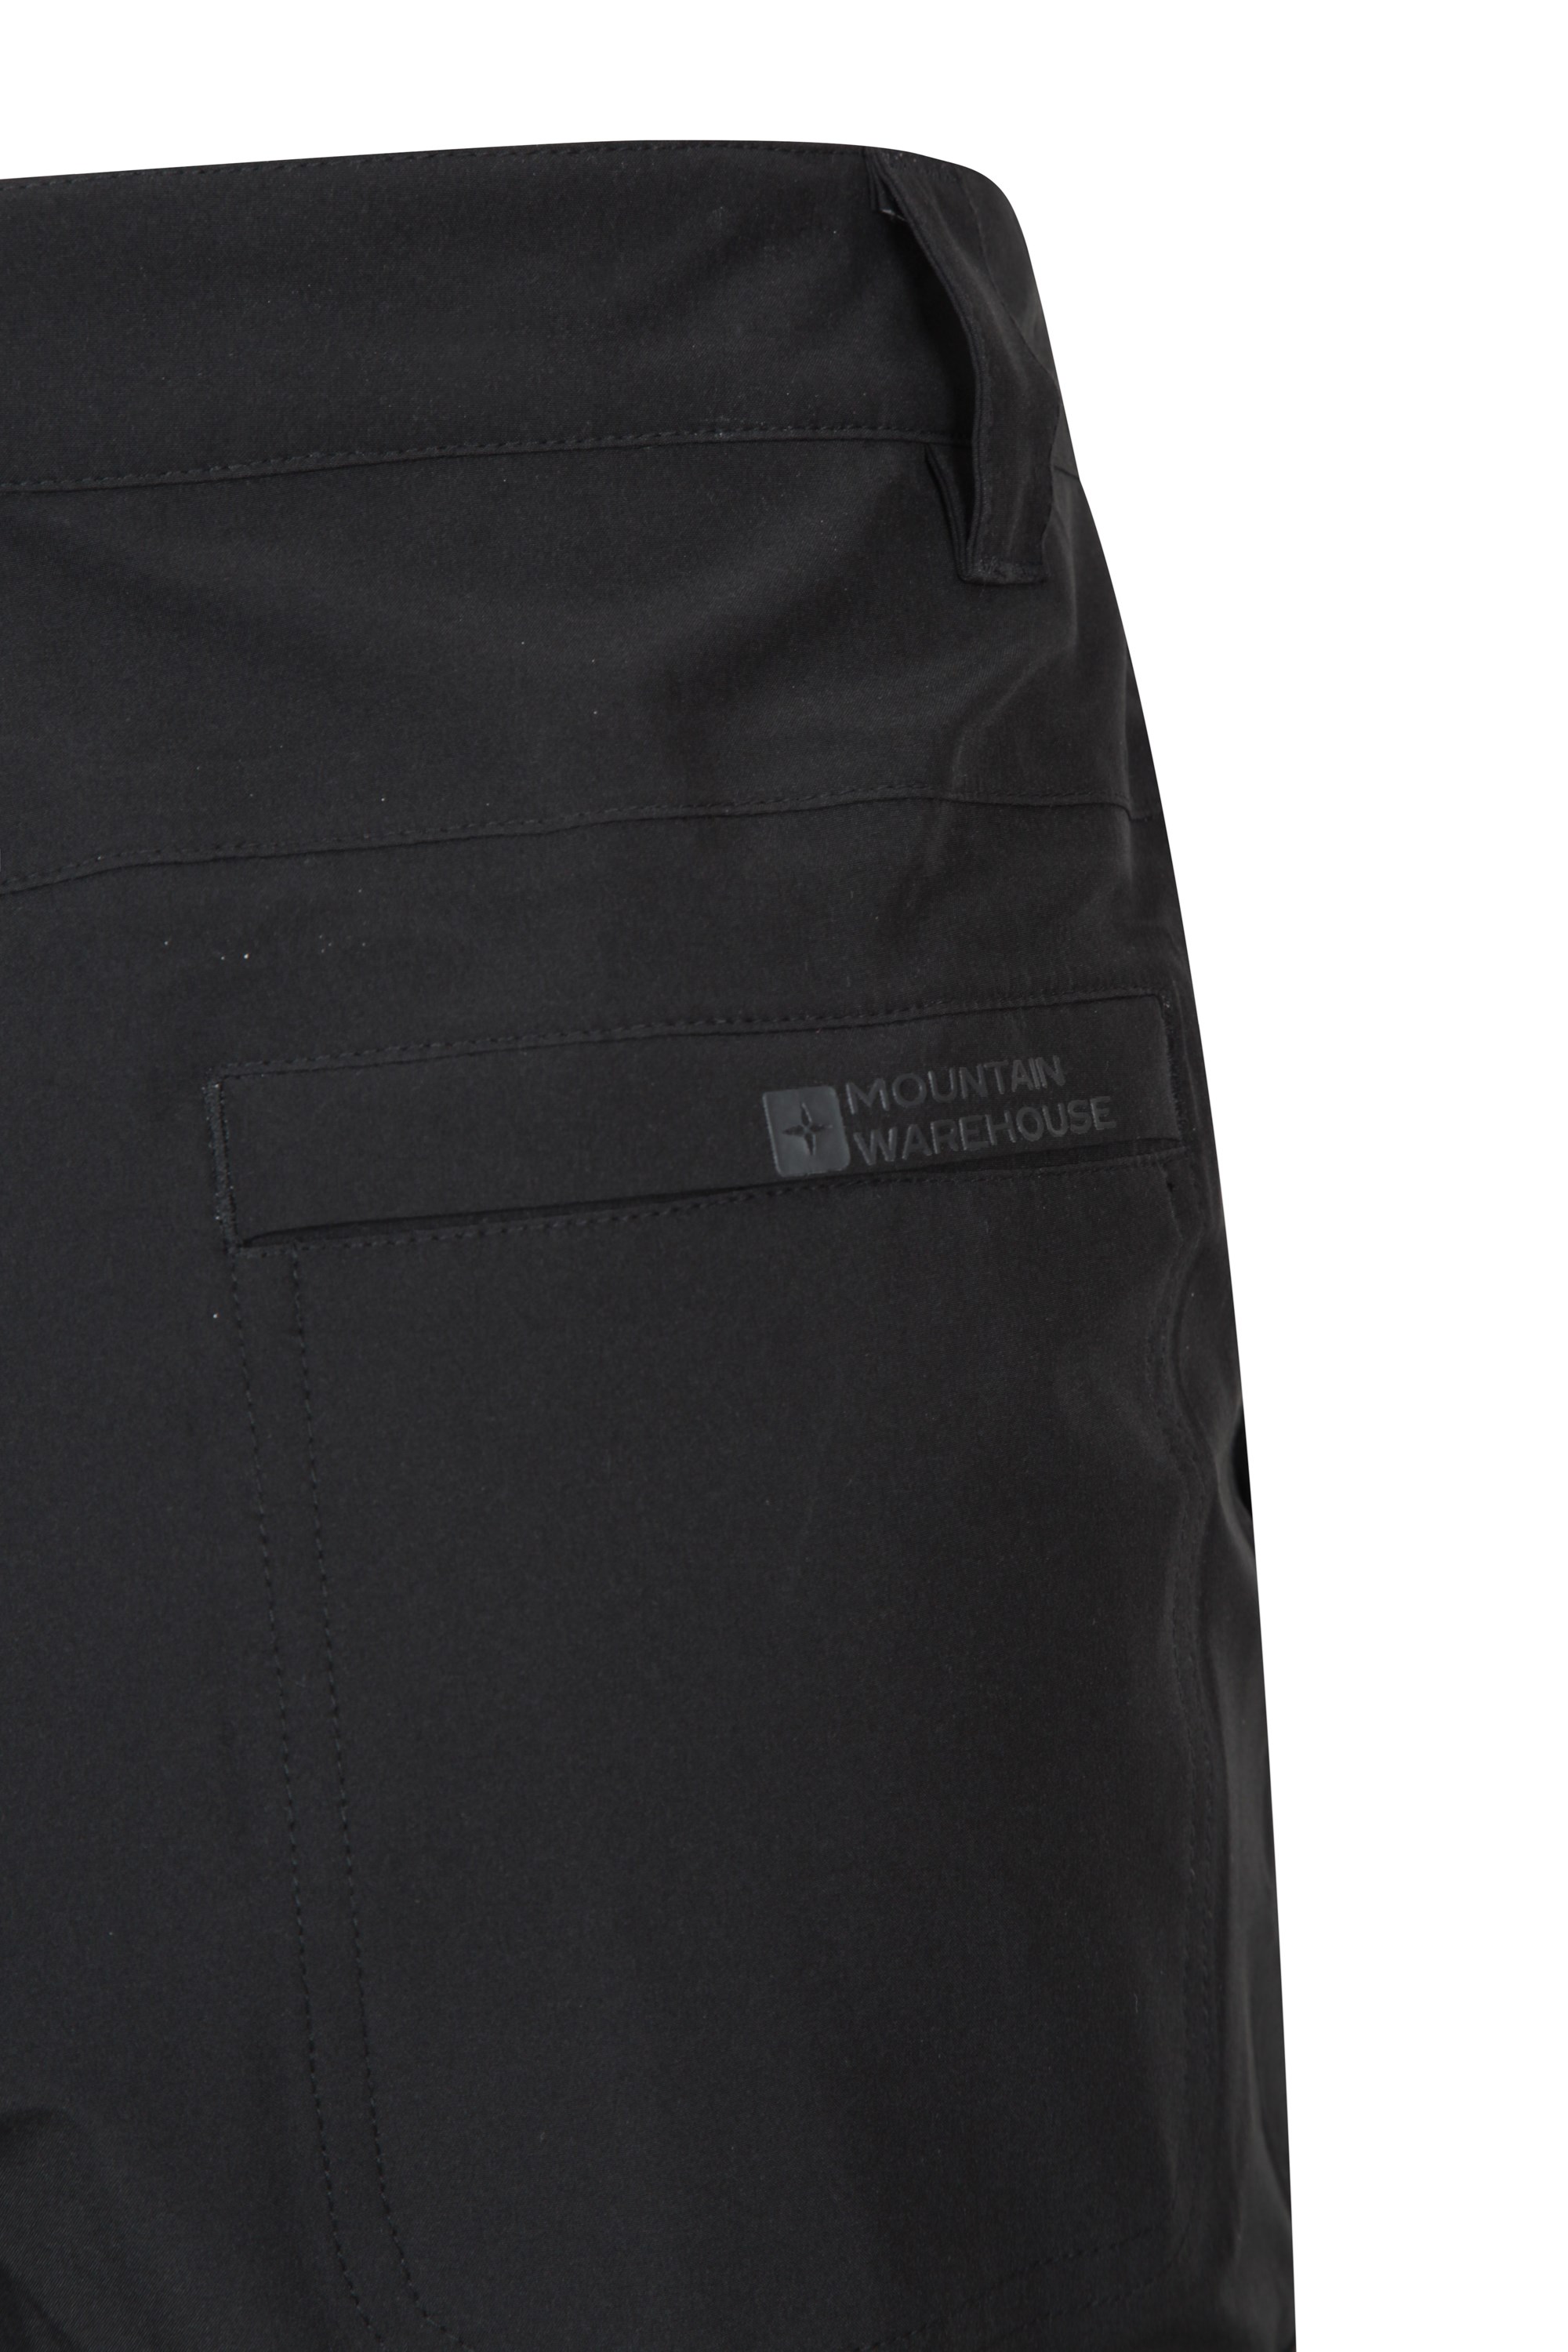 Mountain Warehouse 3 Layer Extreme Waterproof Short Trouser 